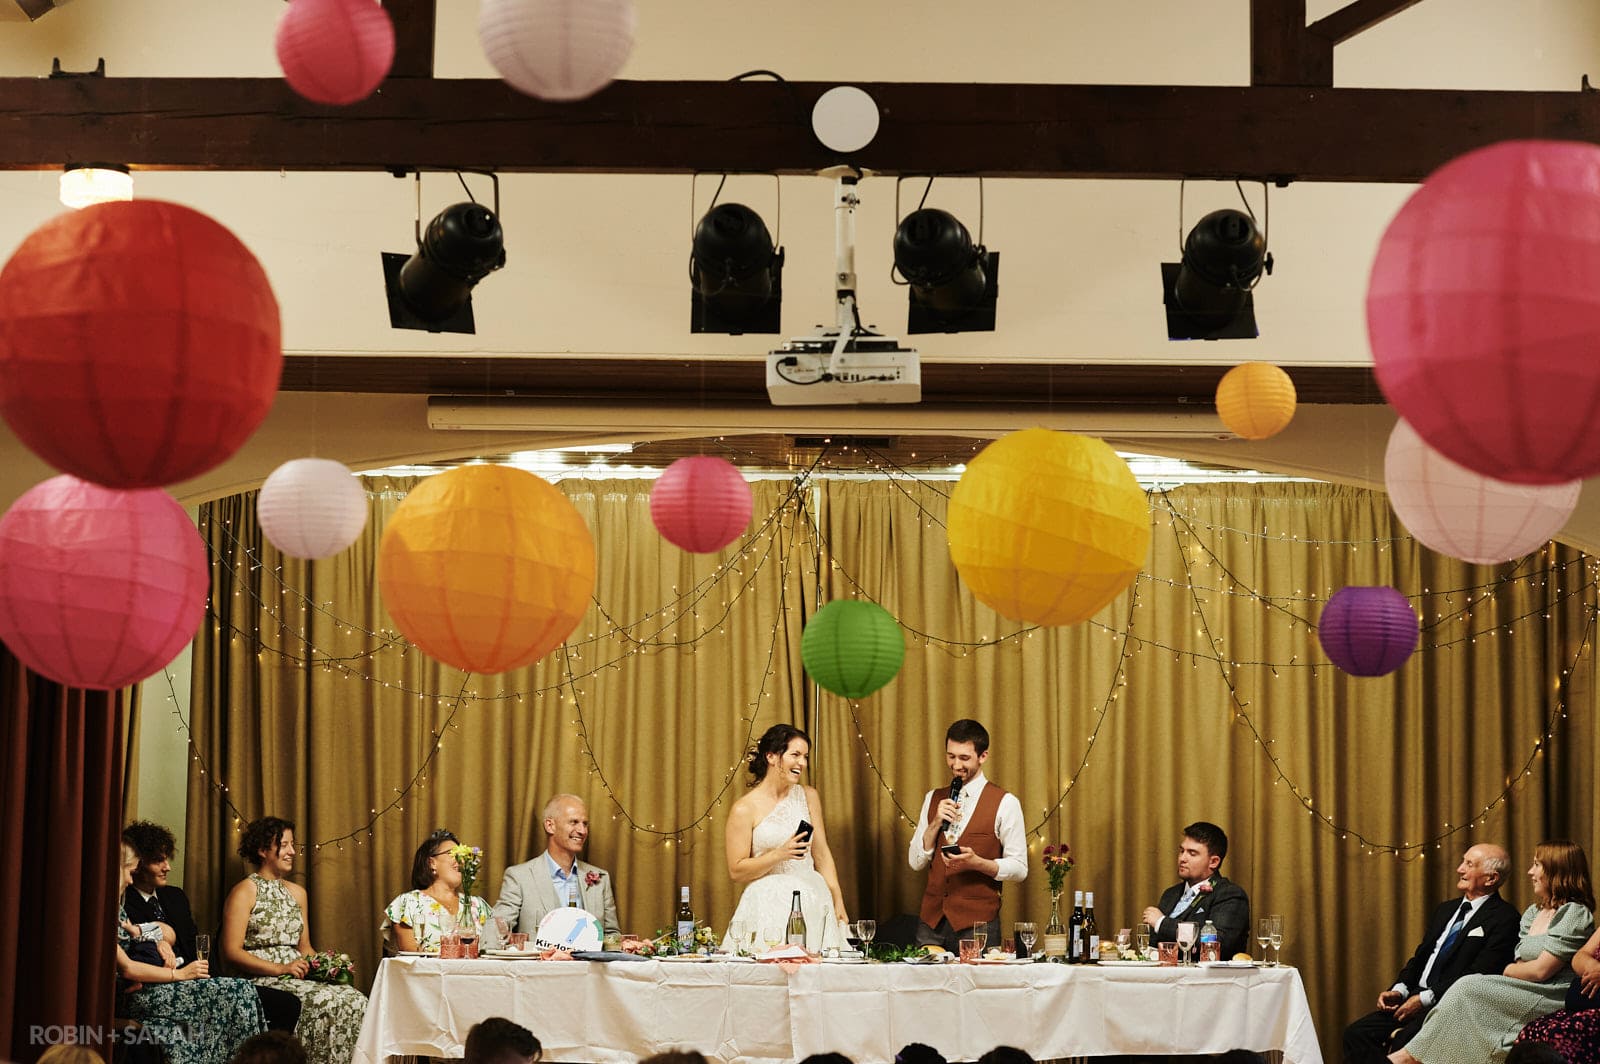 Bride and groom give wedding speech in village hall